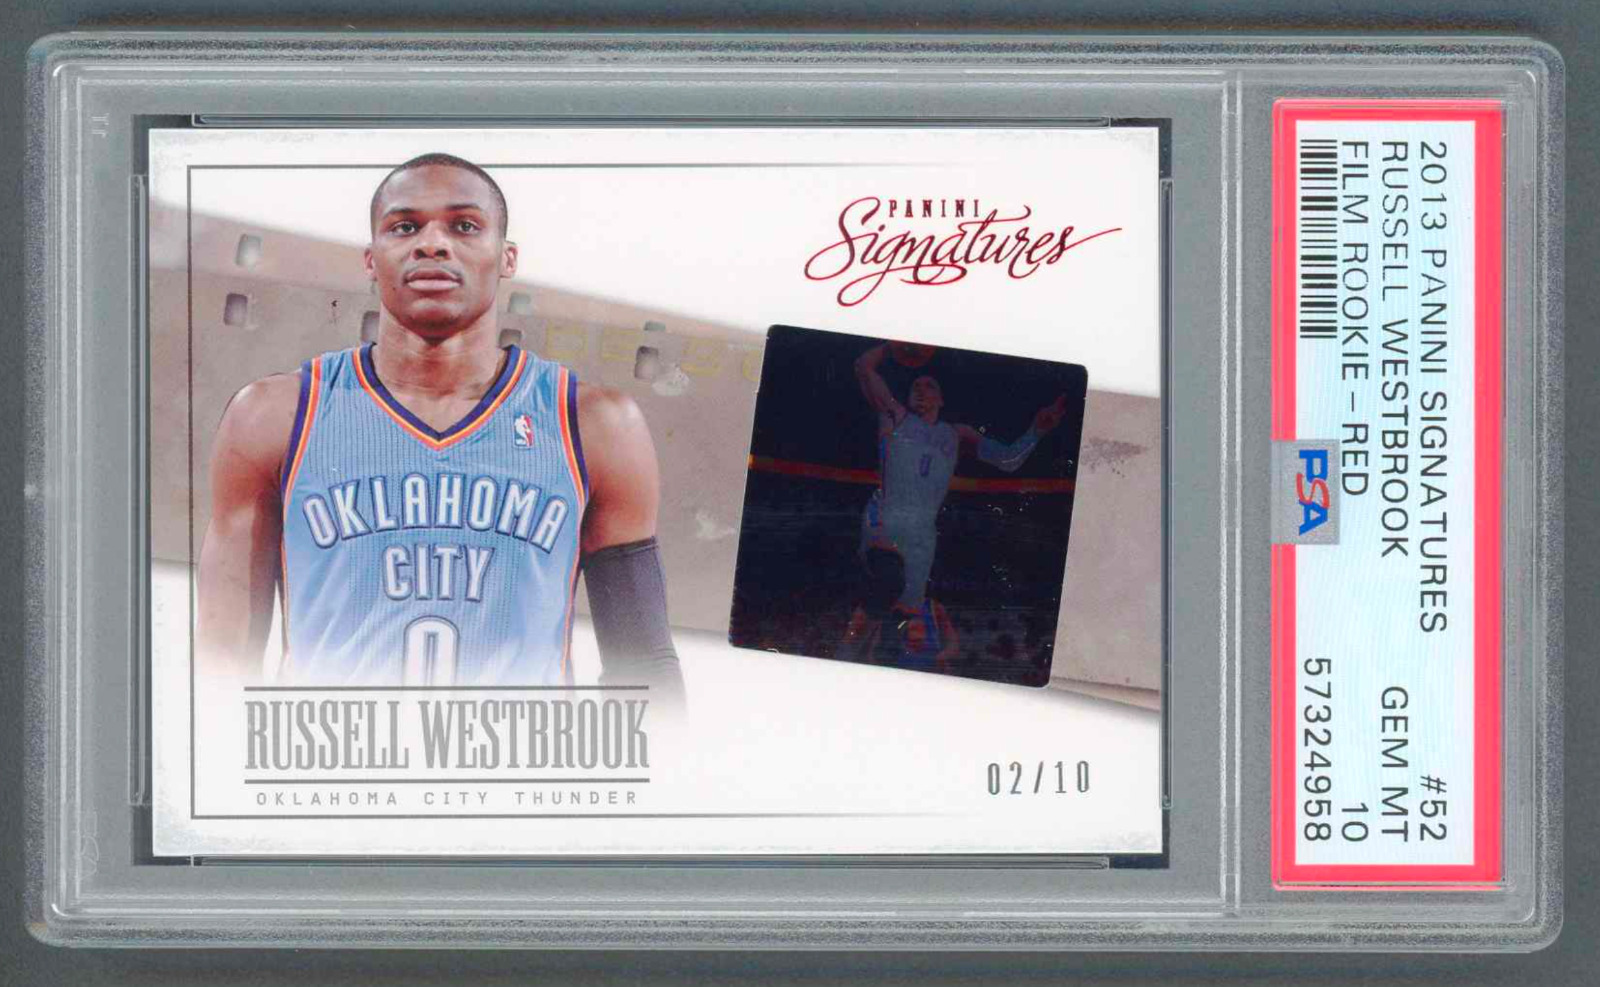 2013-14 Panini Signatures Film Red #52 Russell Westbrook 02/10 PSA 10